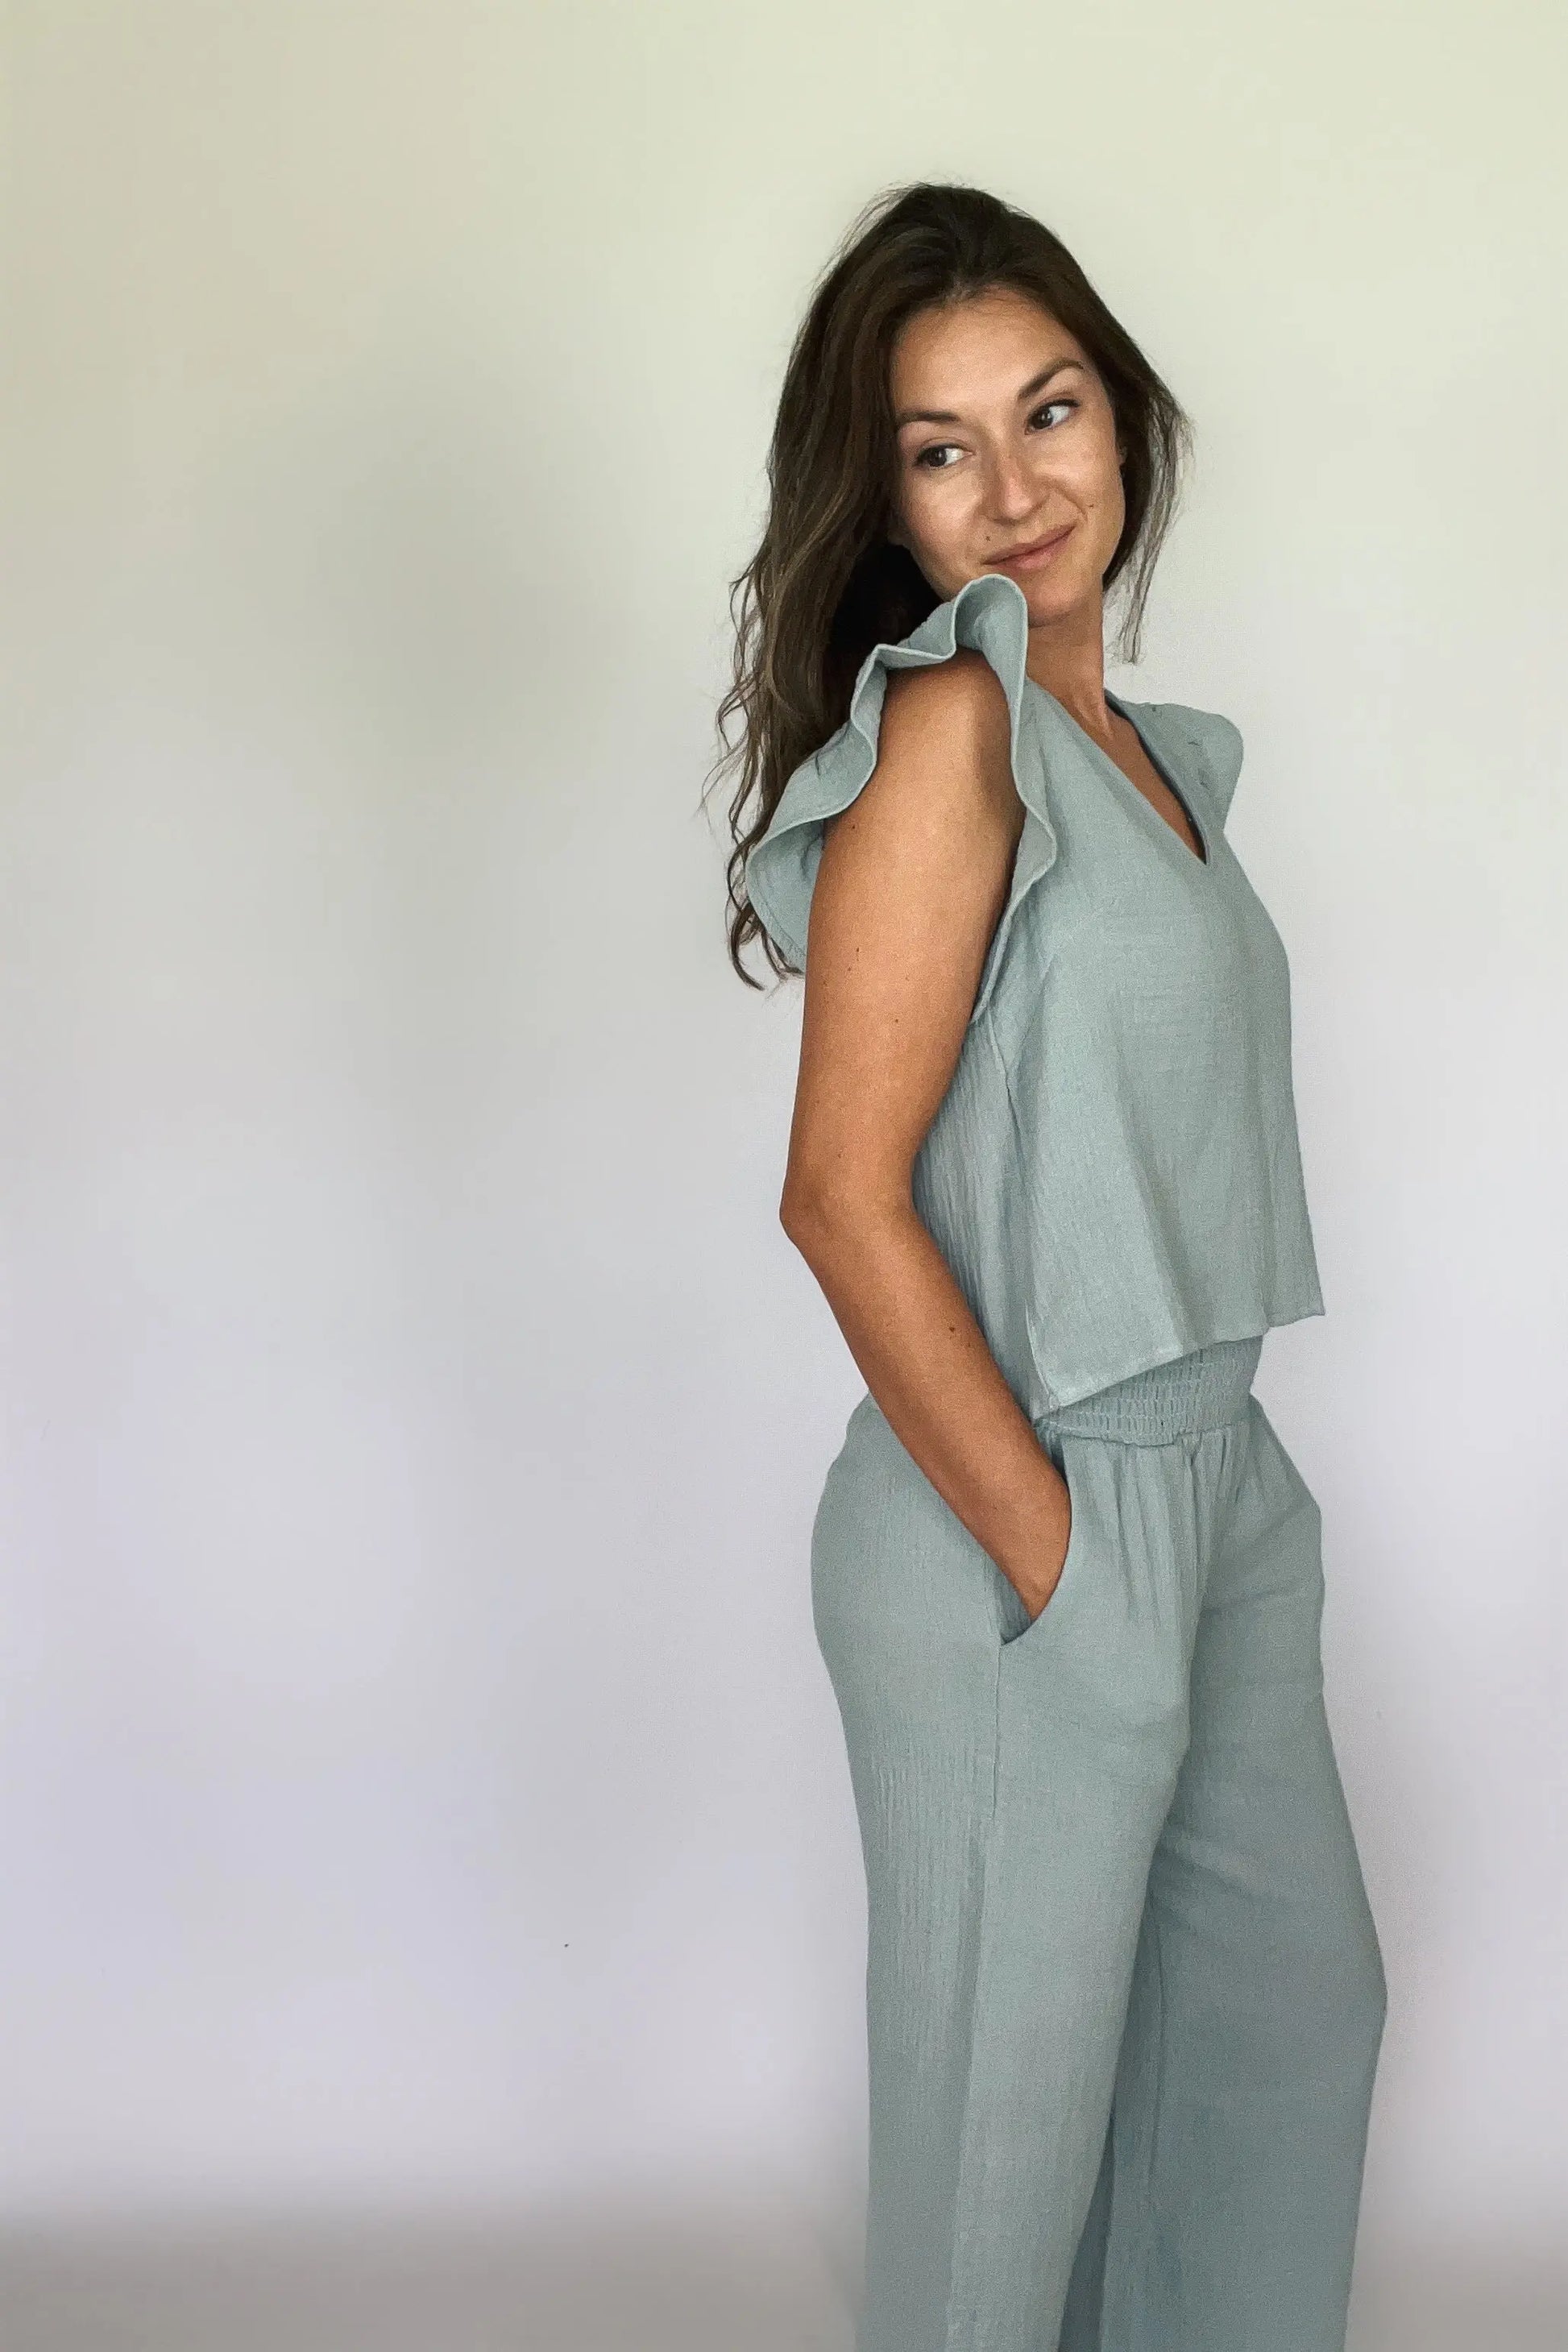 A woman modeling a sea blue cotton gauze ruffled sleeve top with matching pants